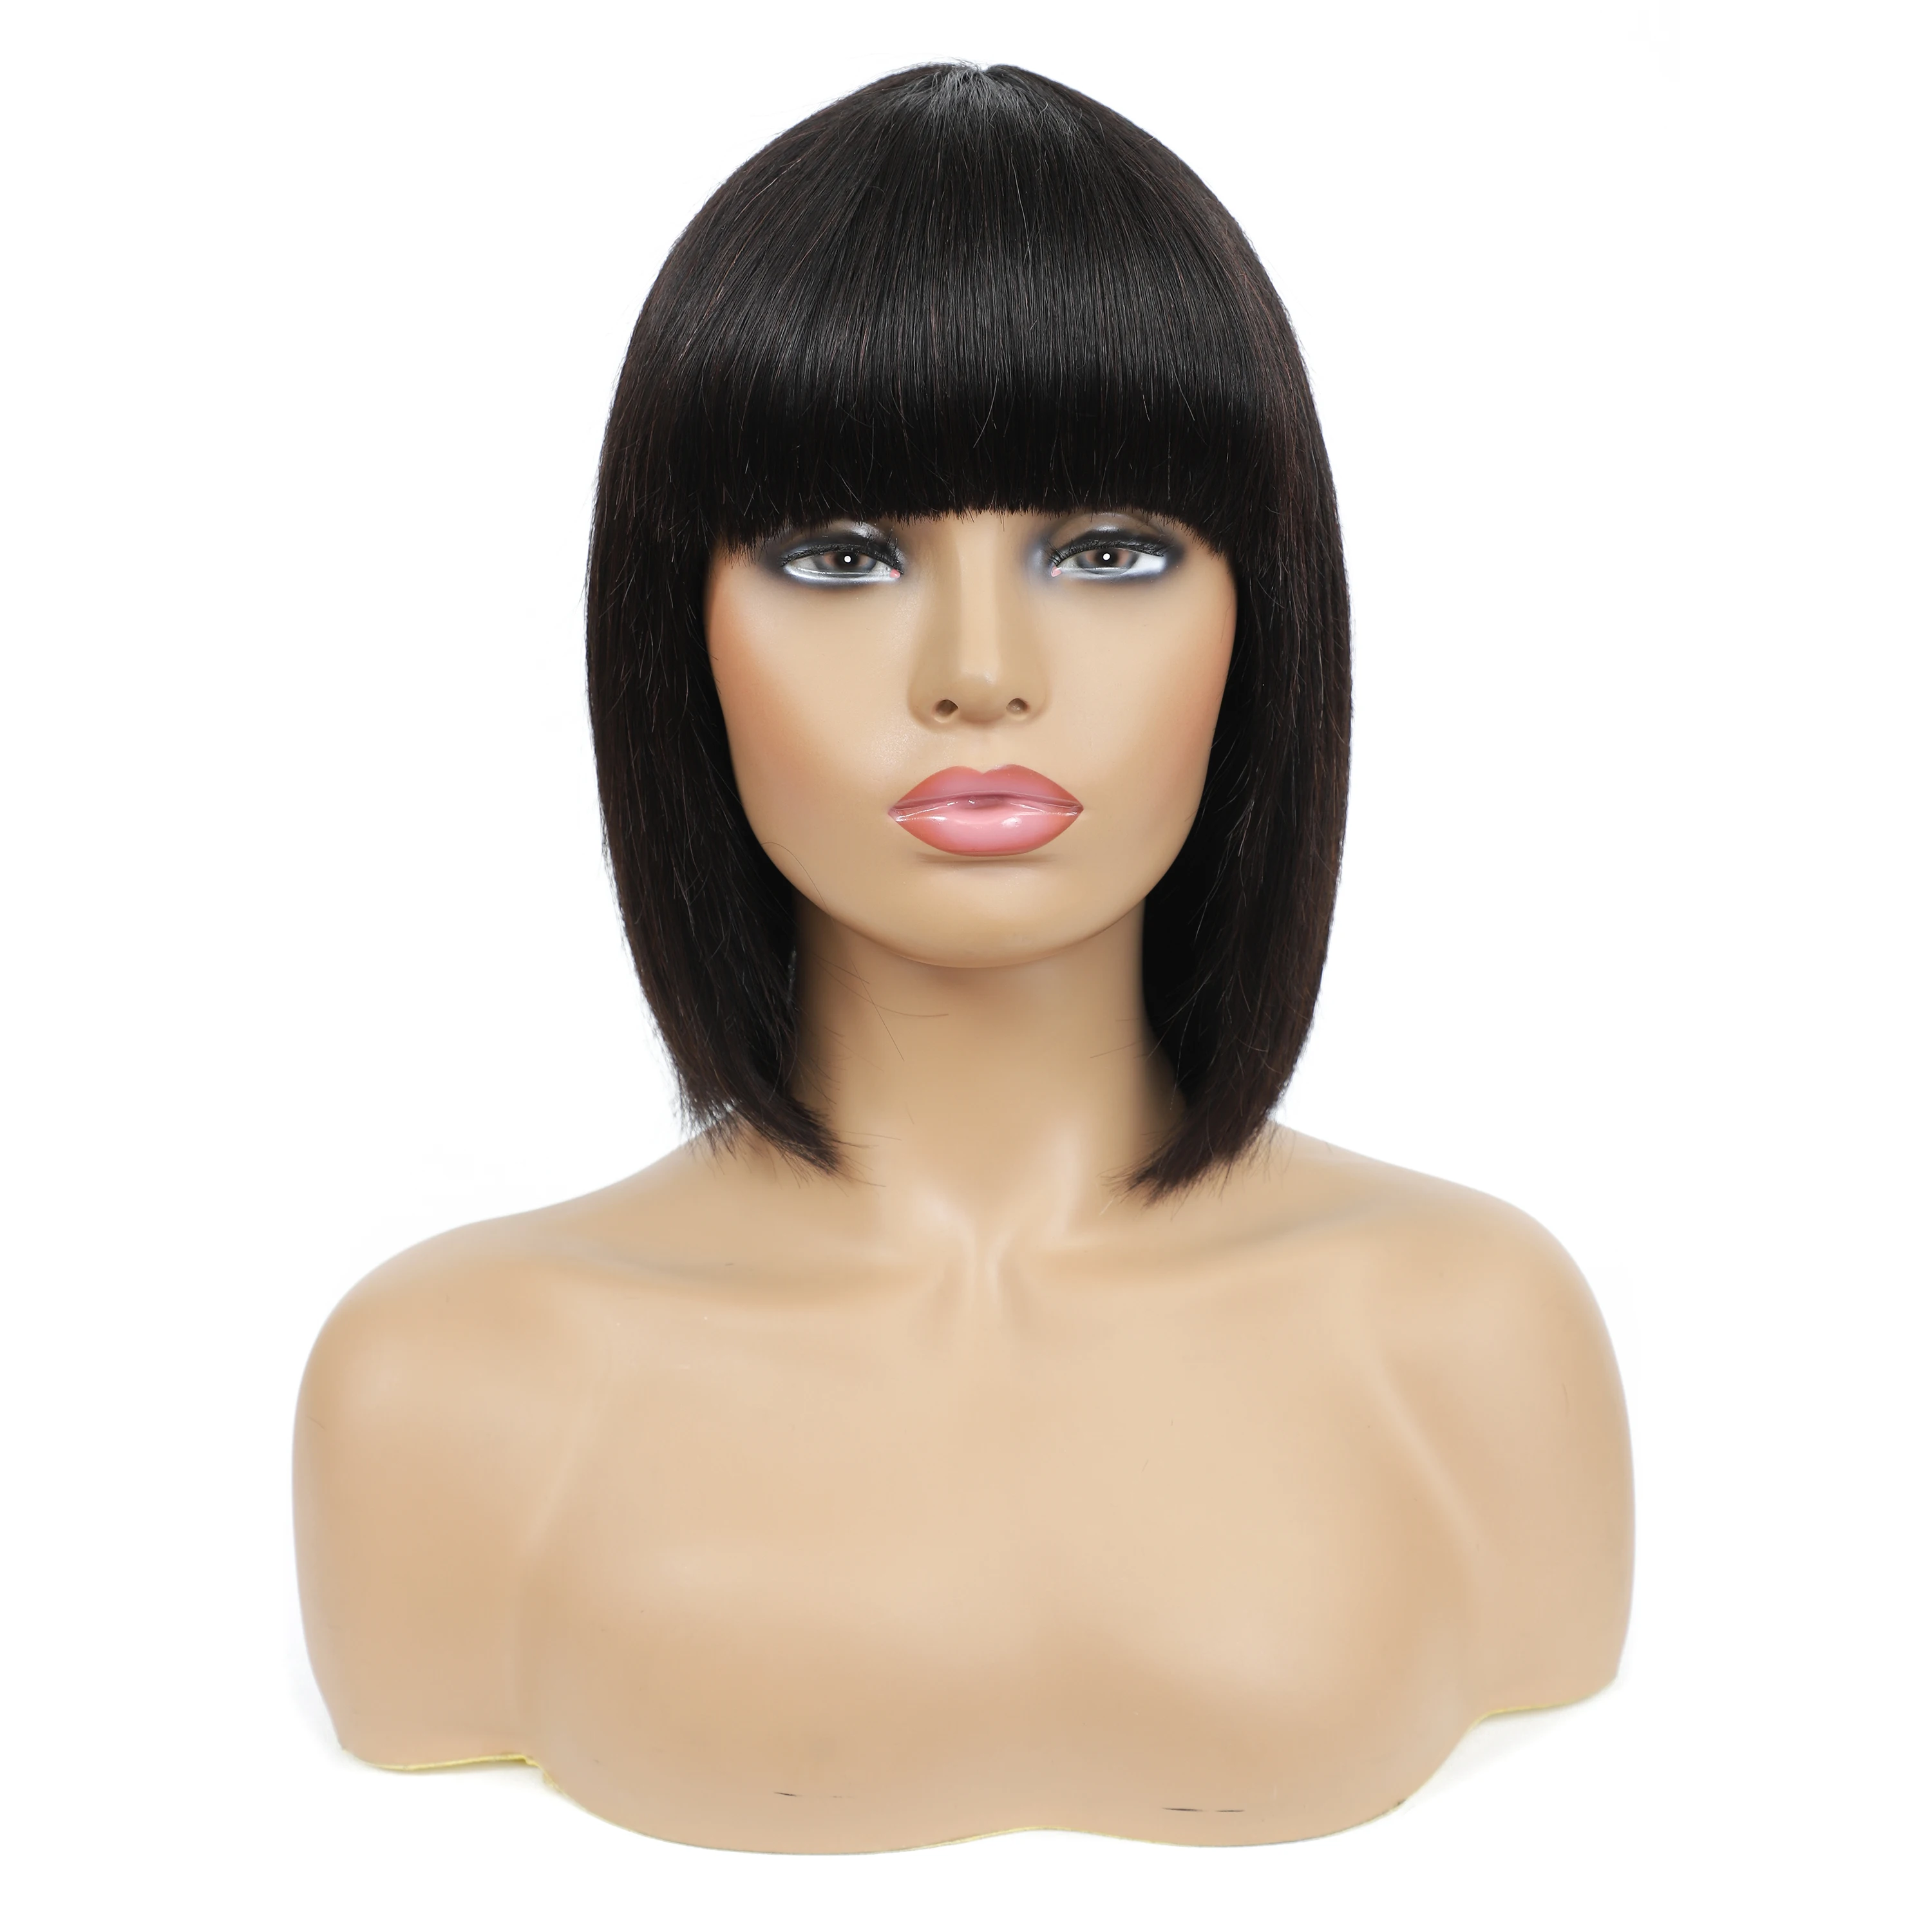 Short Bob Wigs With Bangs Straight Human Hair Wigs For Black Women MISS LISA Full Machine Non Lace Wigs Natural Color Non Remy